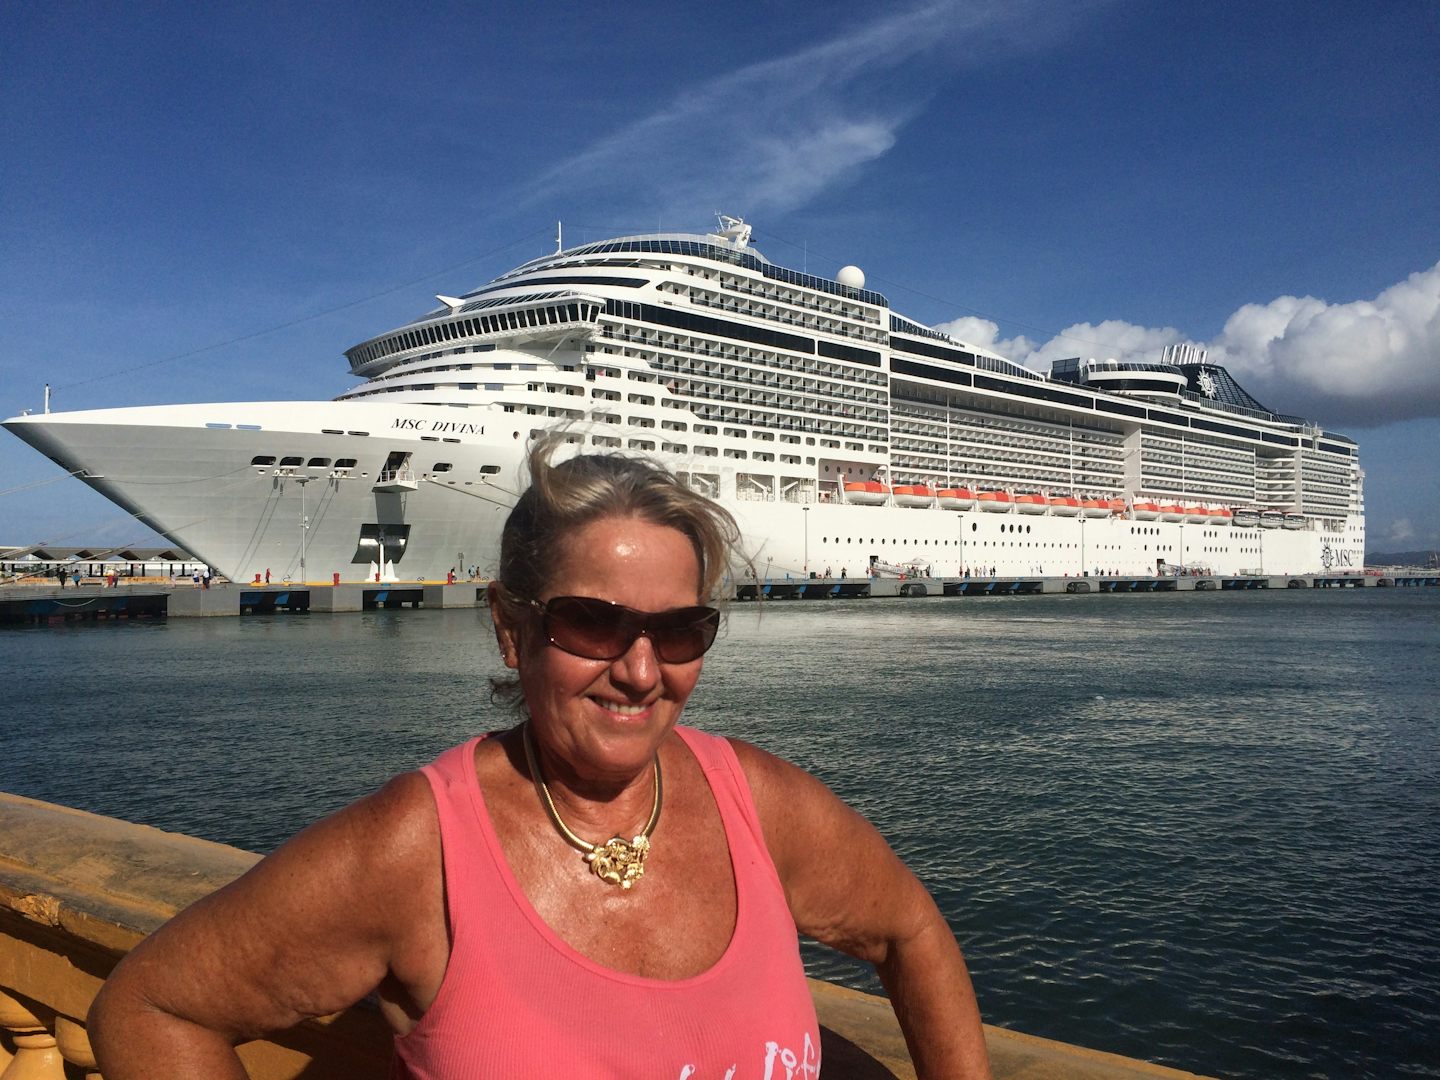 In Puerto Rico with the MSC Divina in the background